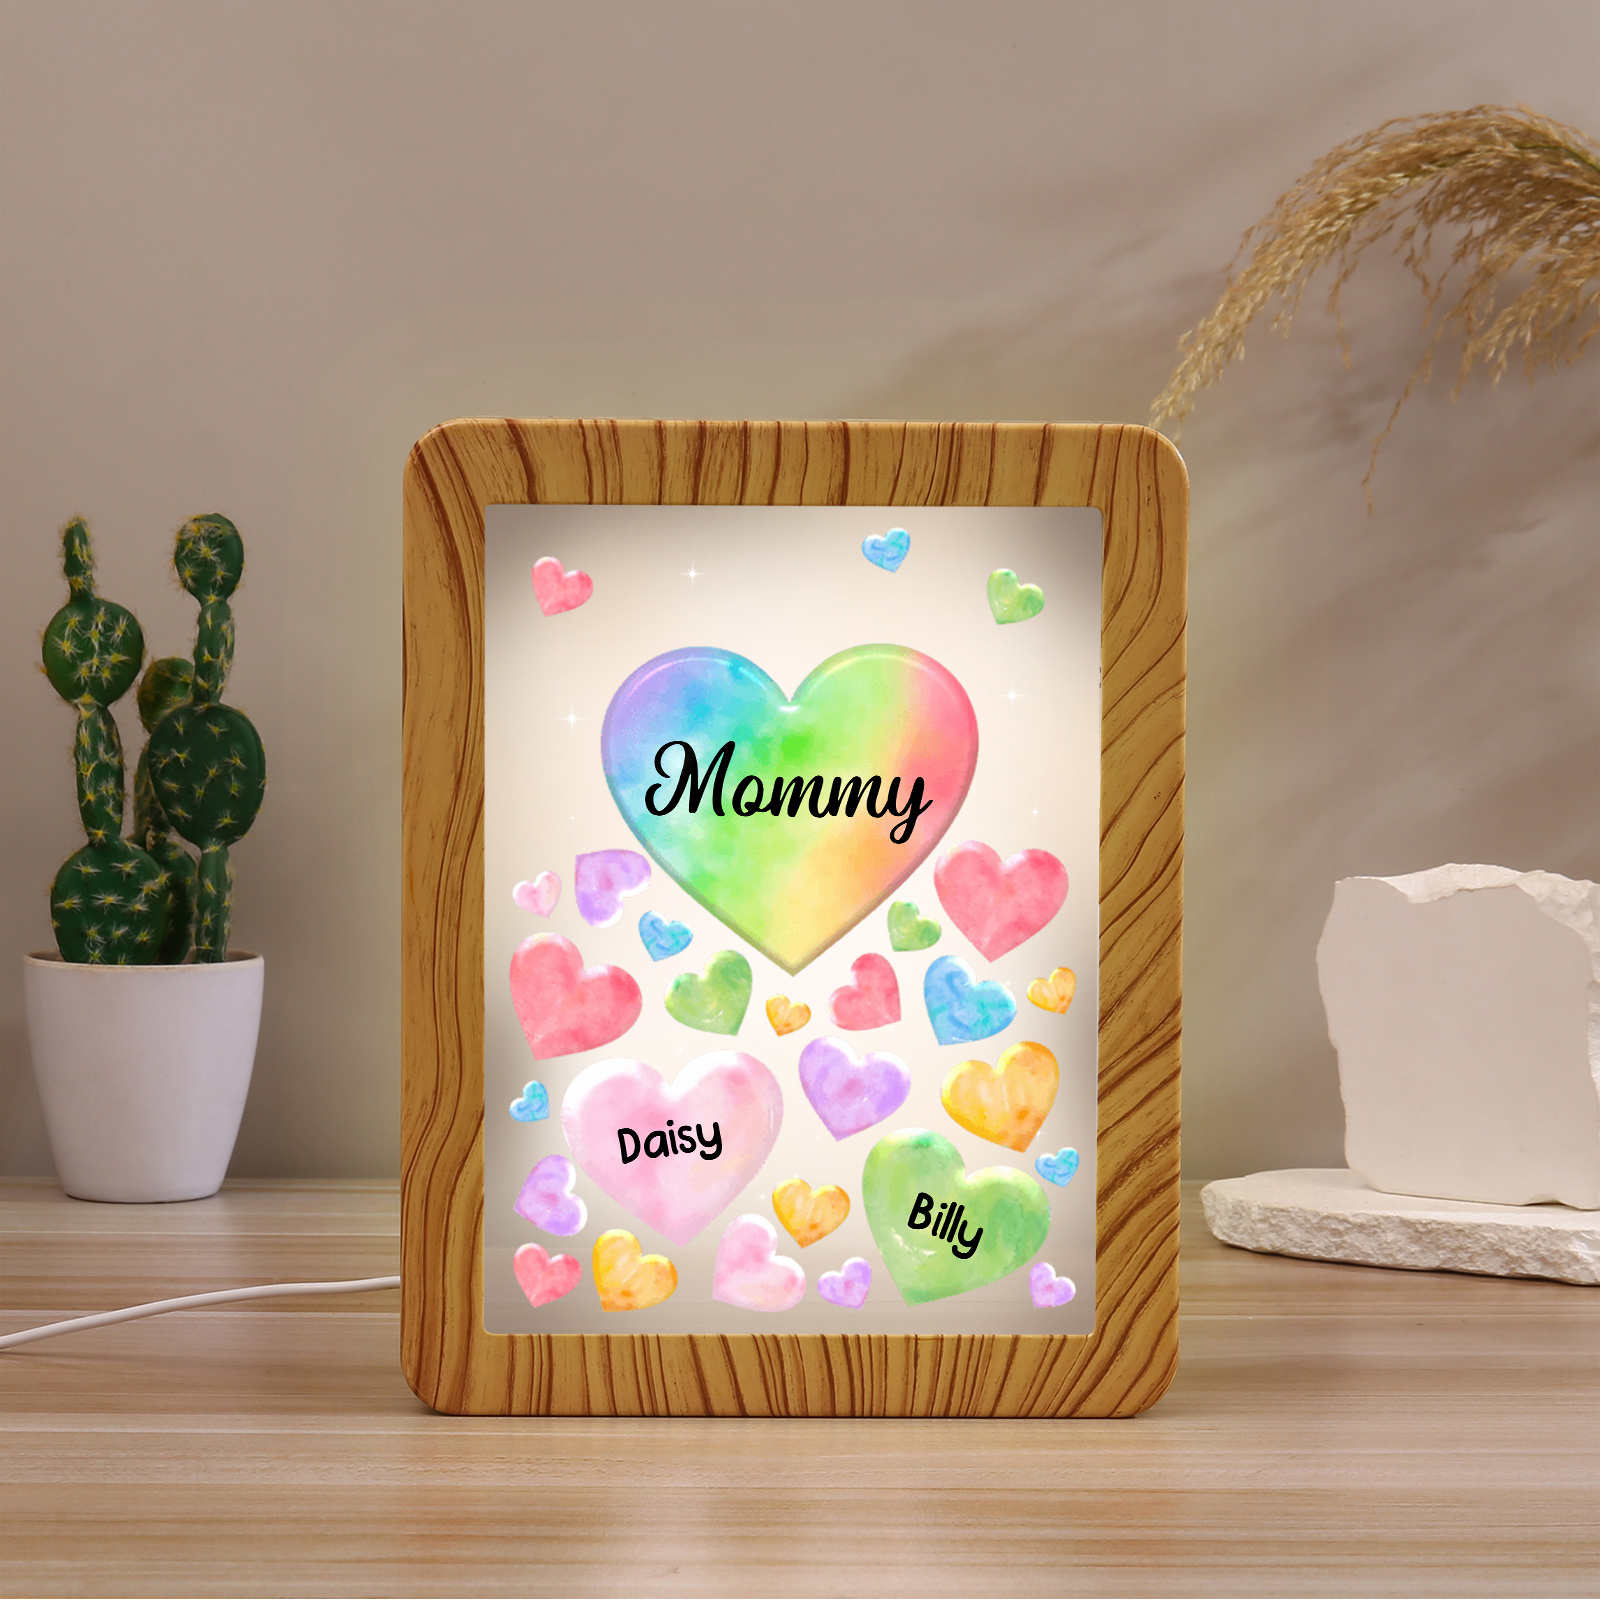 2 Name - Personalized Mum Home Wood Color Plug-in Mirror Photo Frame Custom Text LED Night Light Gift for Mum